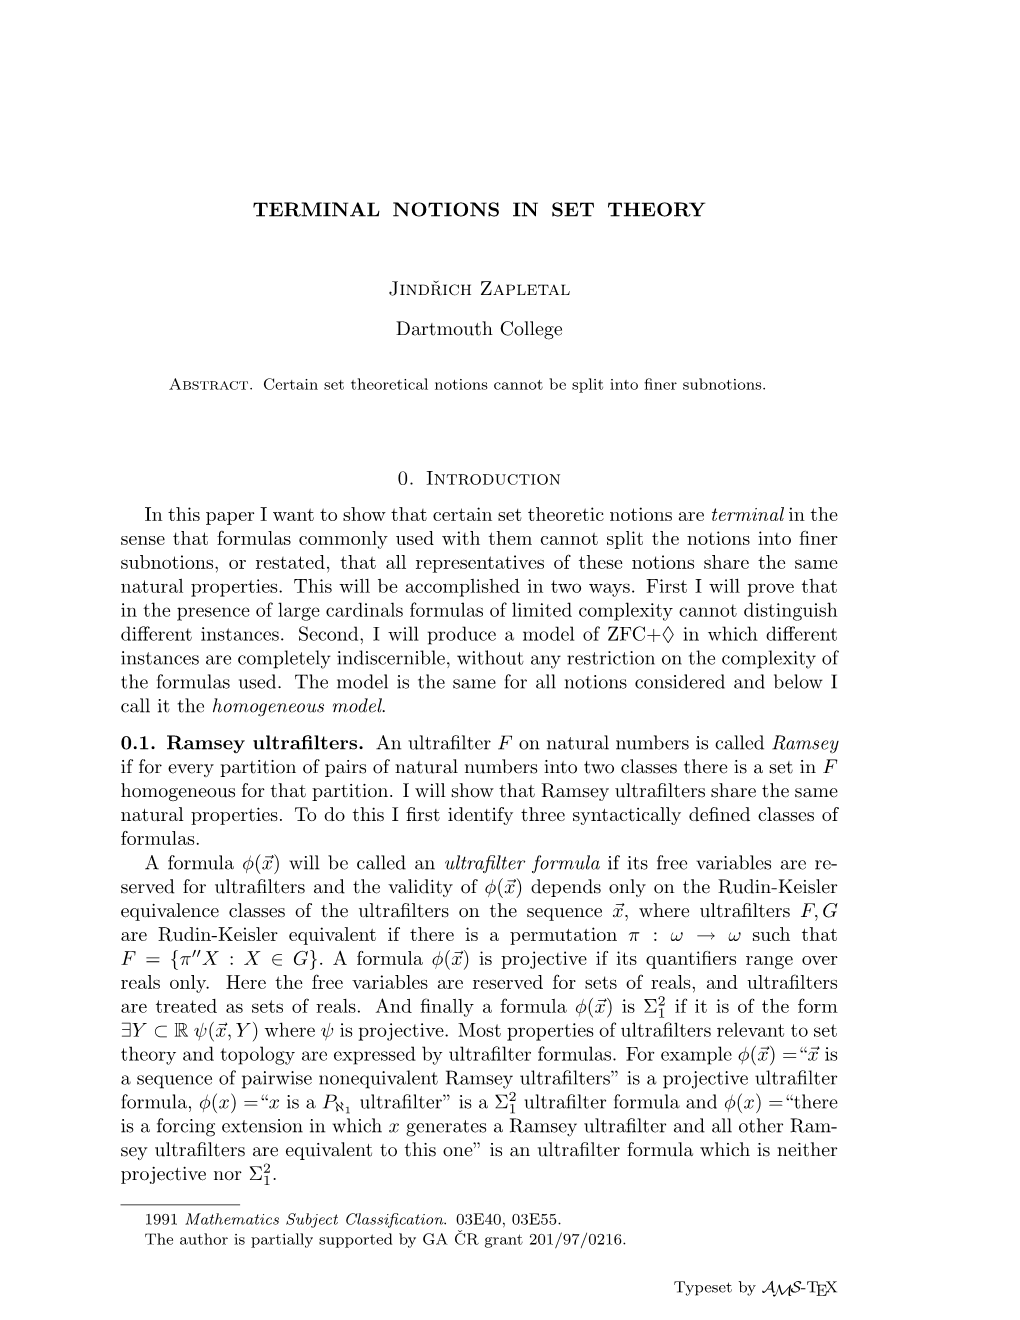 TERMINAL NOTIONS in SET THEORY Jindrich Zapletal Dartmouth College 0. Introduction in This Paper I Want to Show That Certain